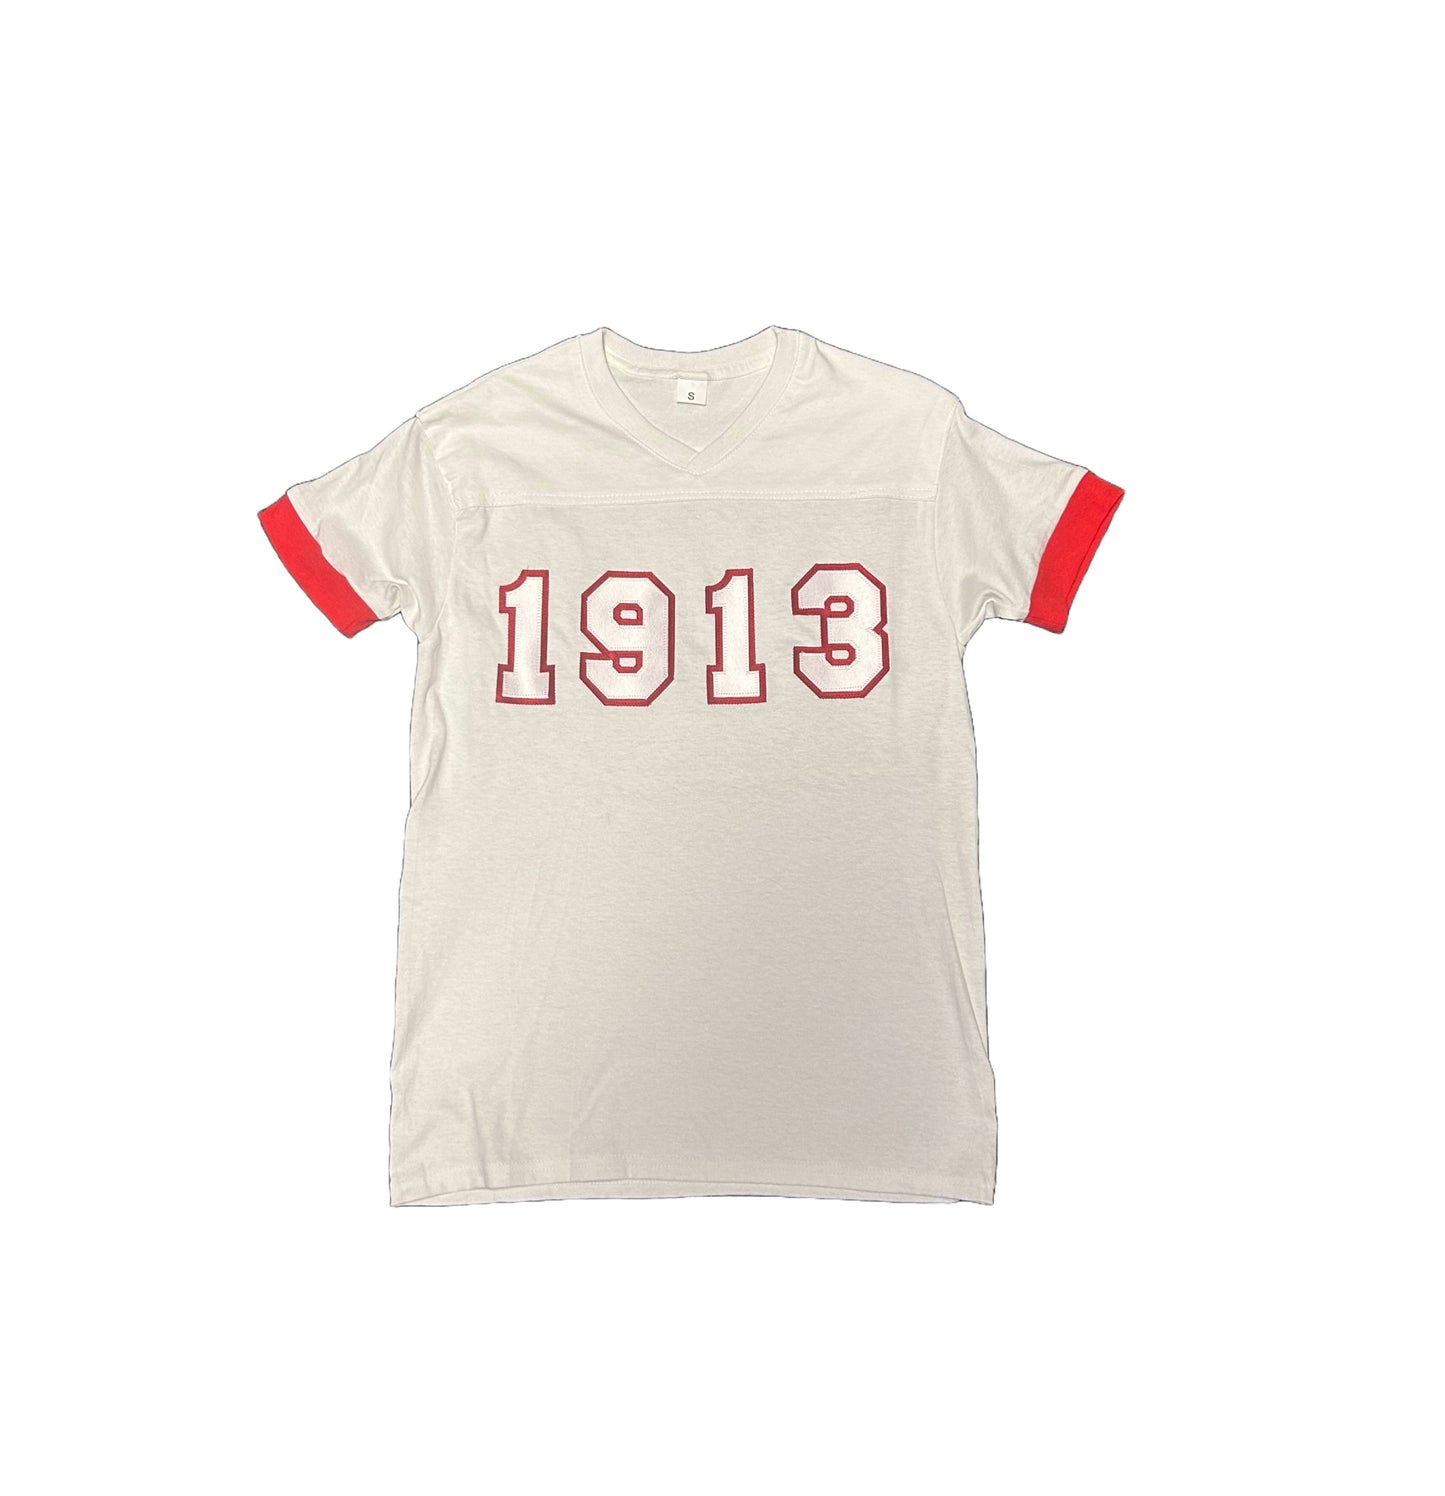 DST T-Shirt - Classic 1913 Embroidered White T-Shirt with Red Trim